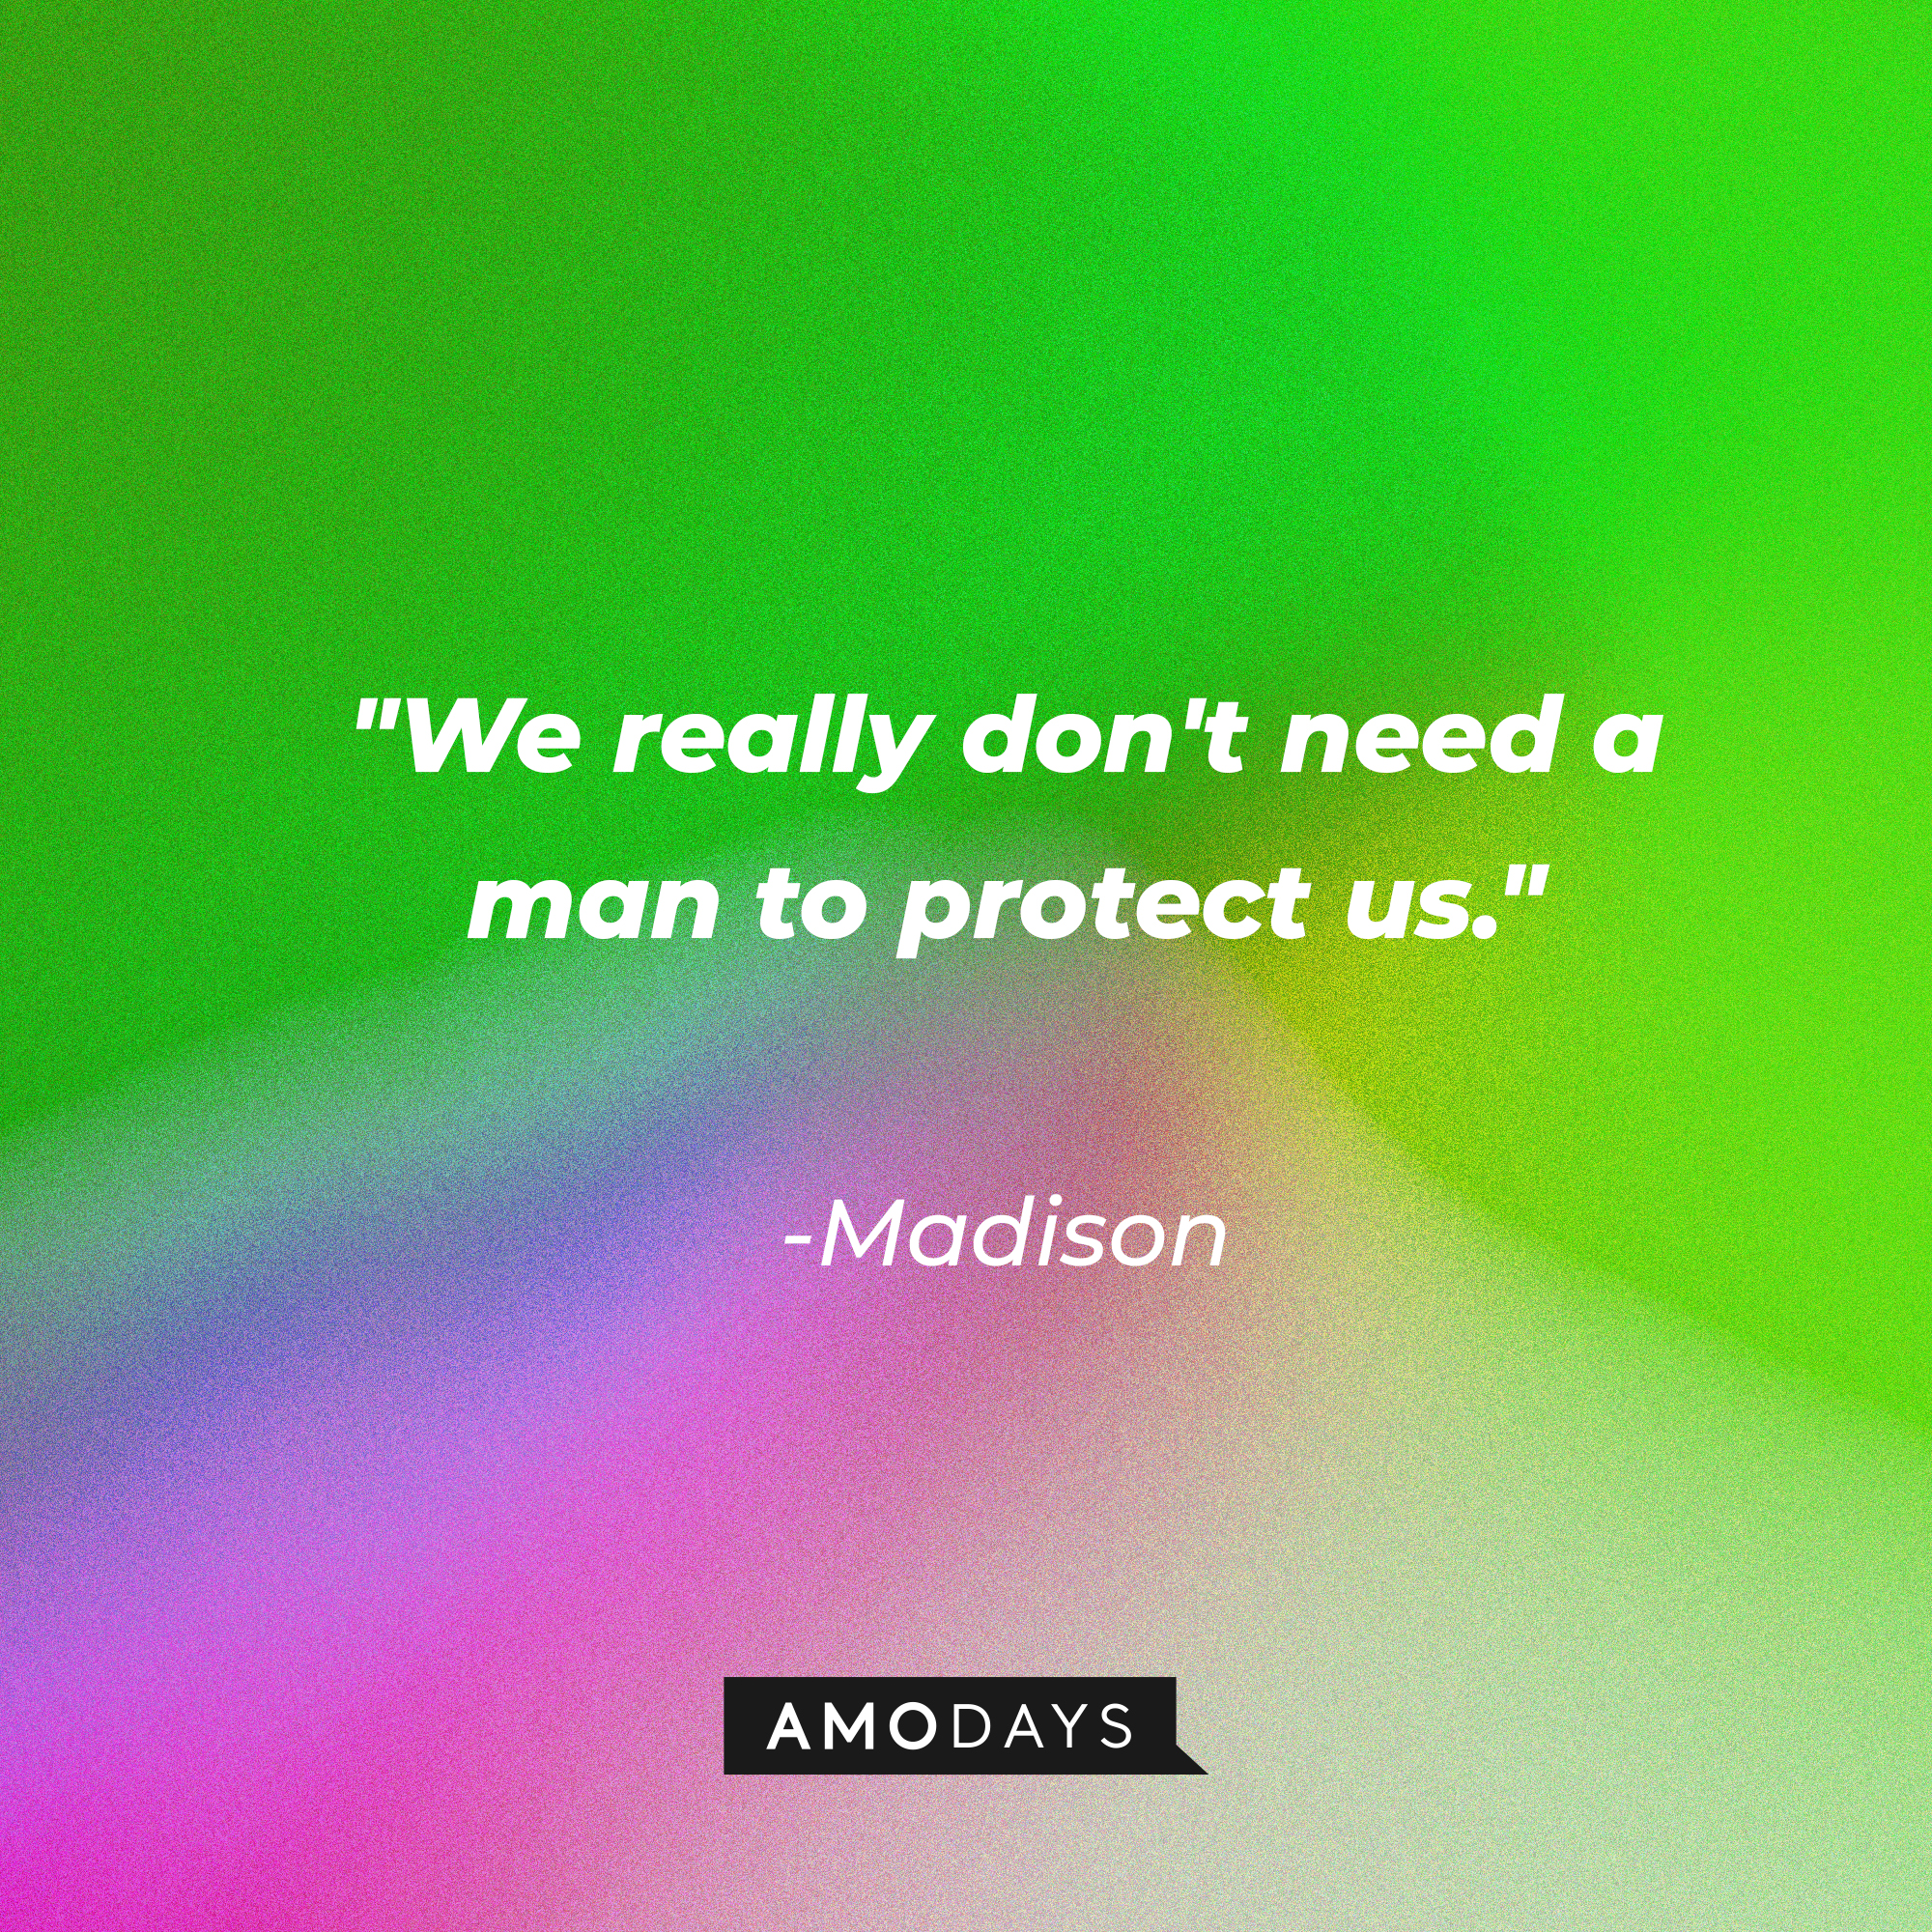 Madison’s quote: “We really don't need a man to protect us.”  | Source: AmoDays